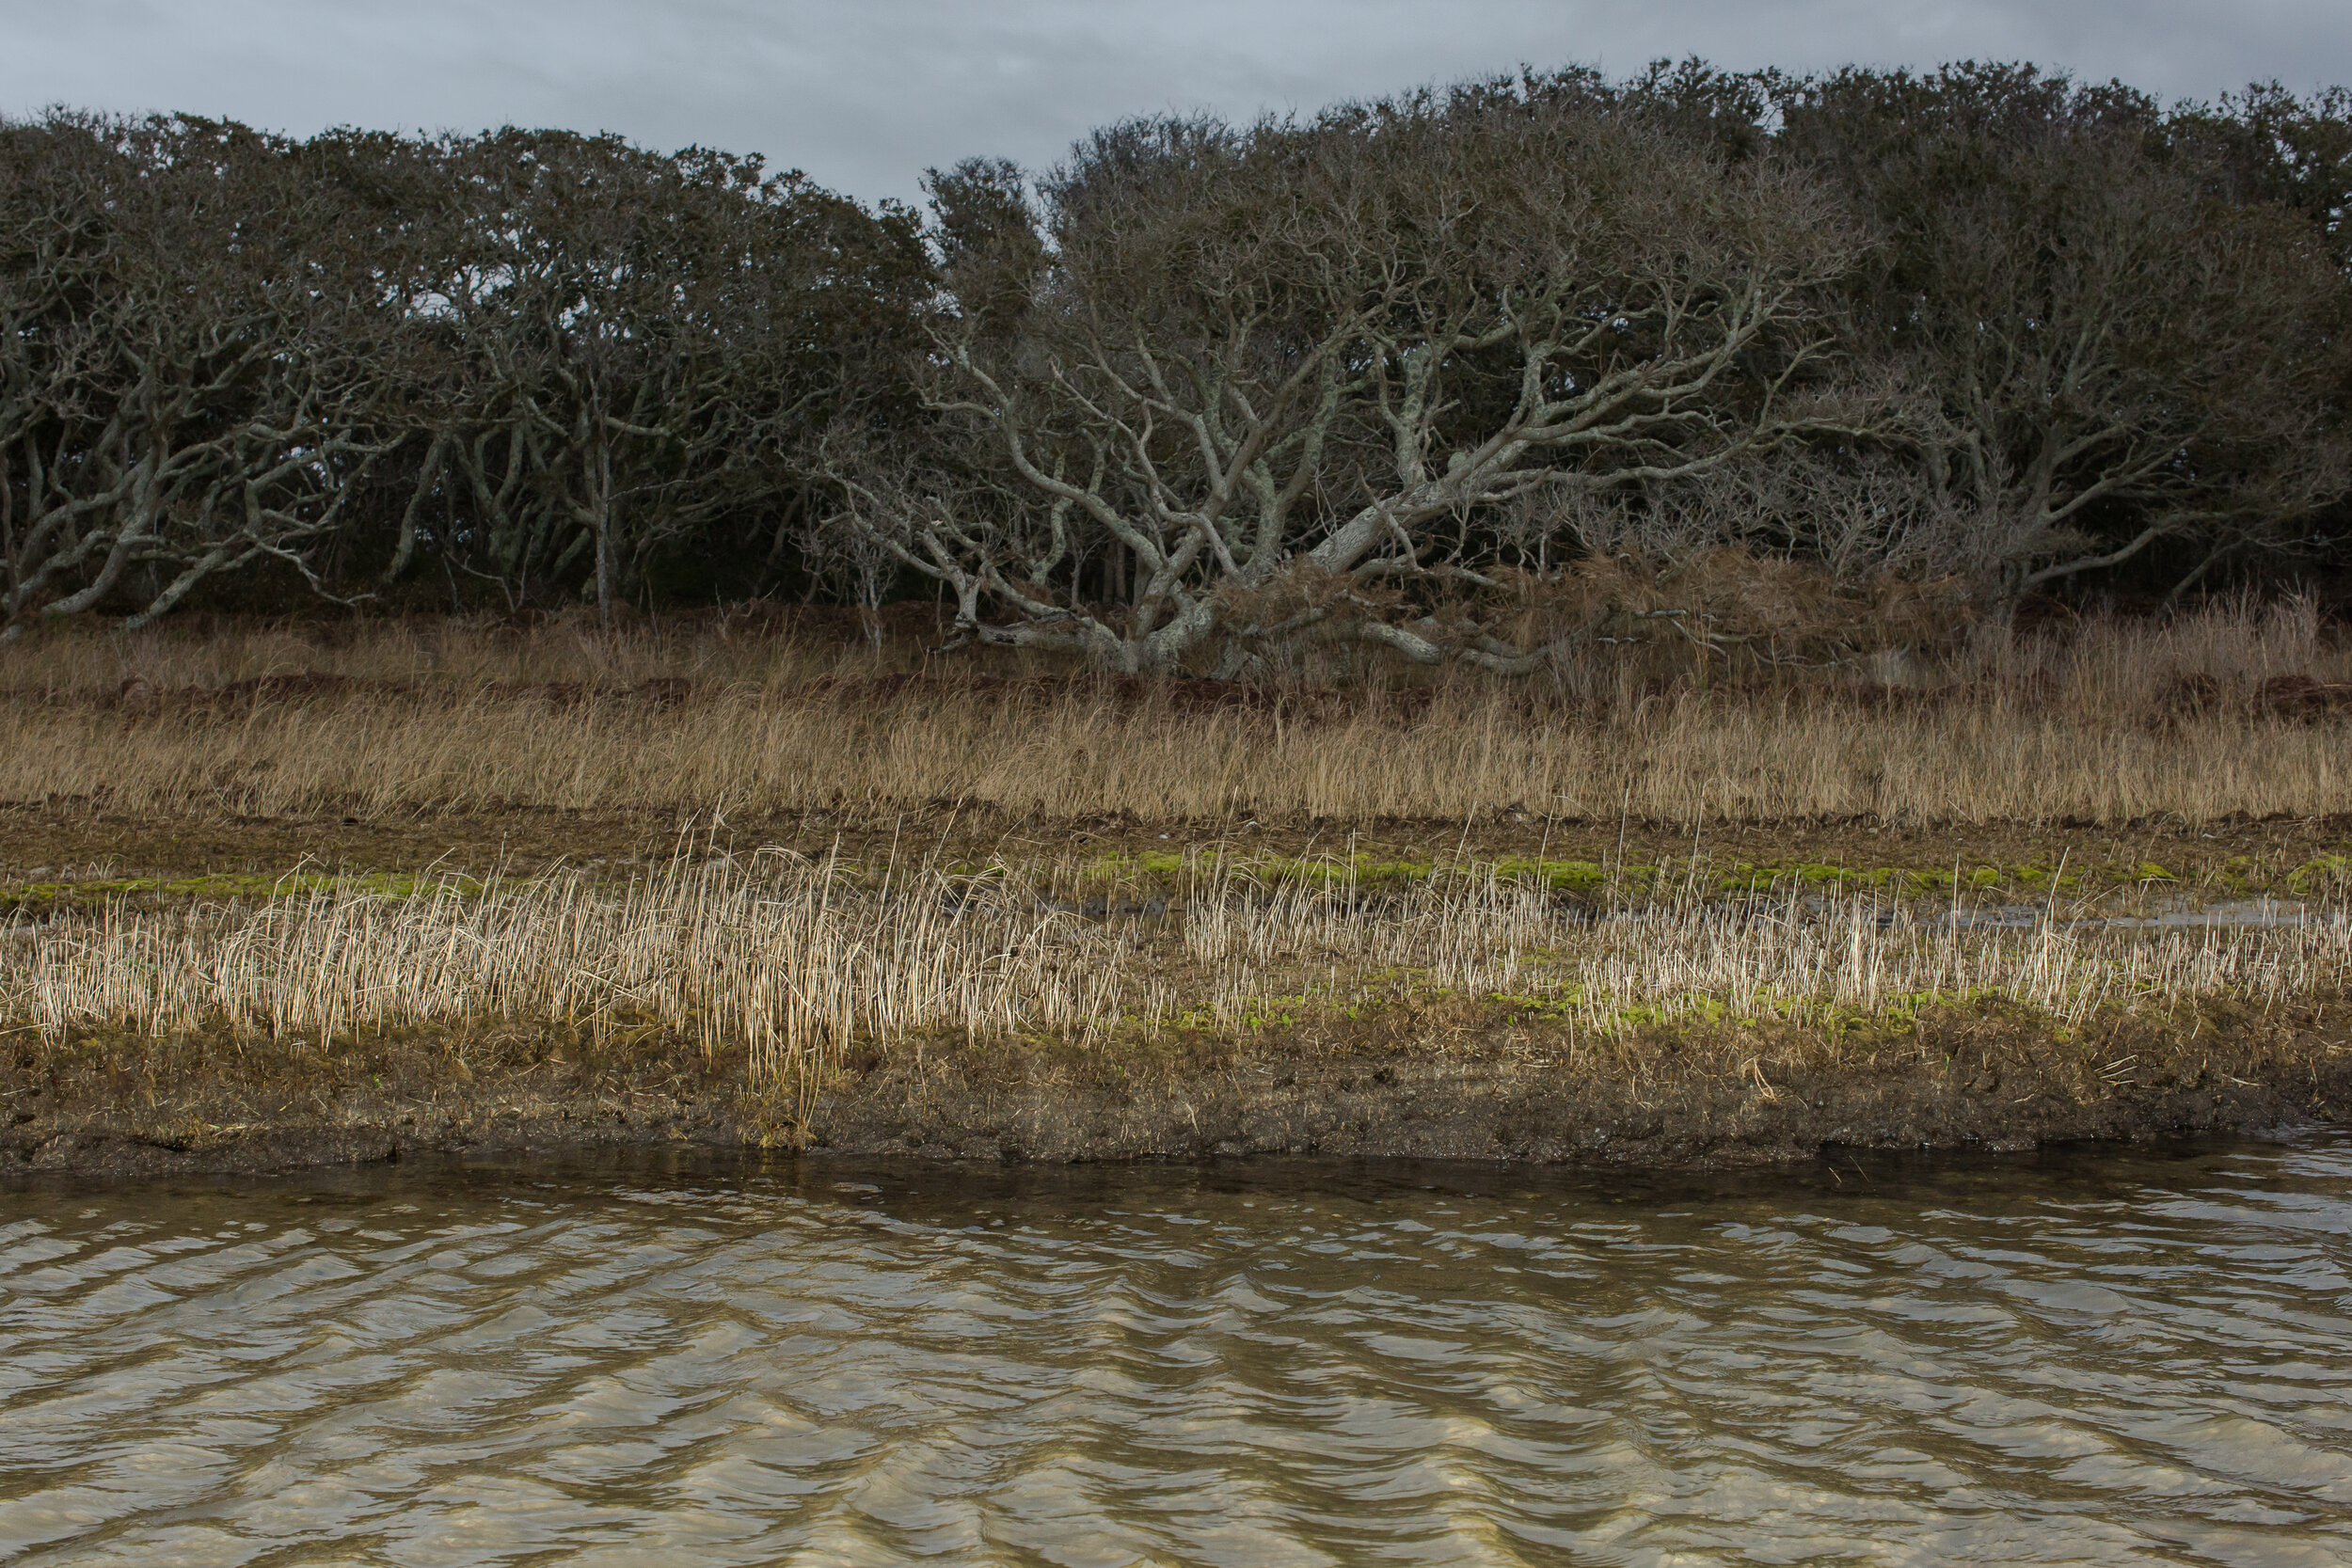  The eroding marsh at the Salvo Day Use Area. Winter, 2019. According to the book  Rising  by Elizabeth Rush, marshes are huge carbon sinks. Though coastal marshes and other wetlands only cover 5 percent of the planet’s land, they store a quarter of 